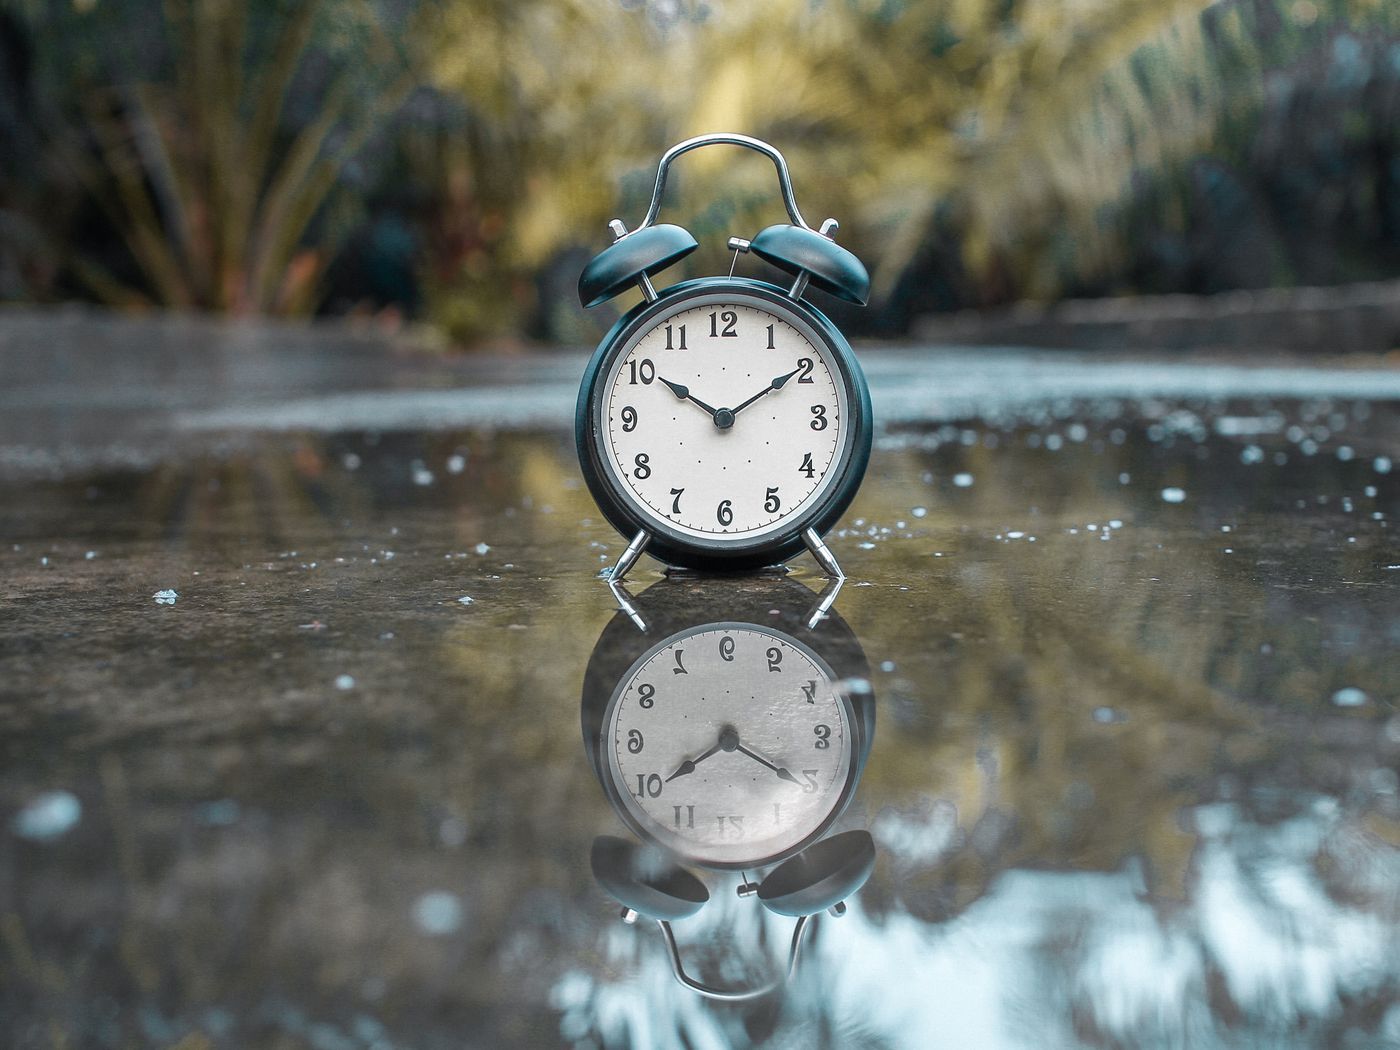 Daylight saving time 2020 ends Sunday: 8 things to know about “spring forward, fall back”